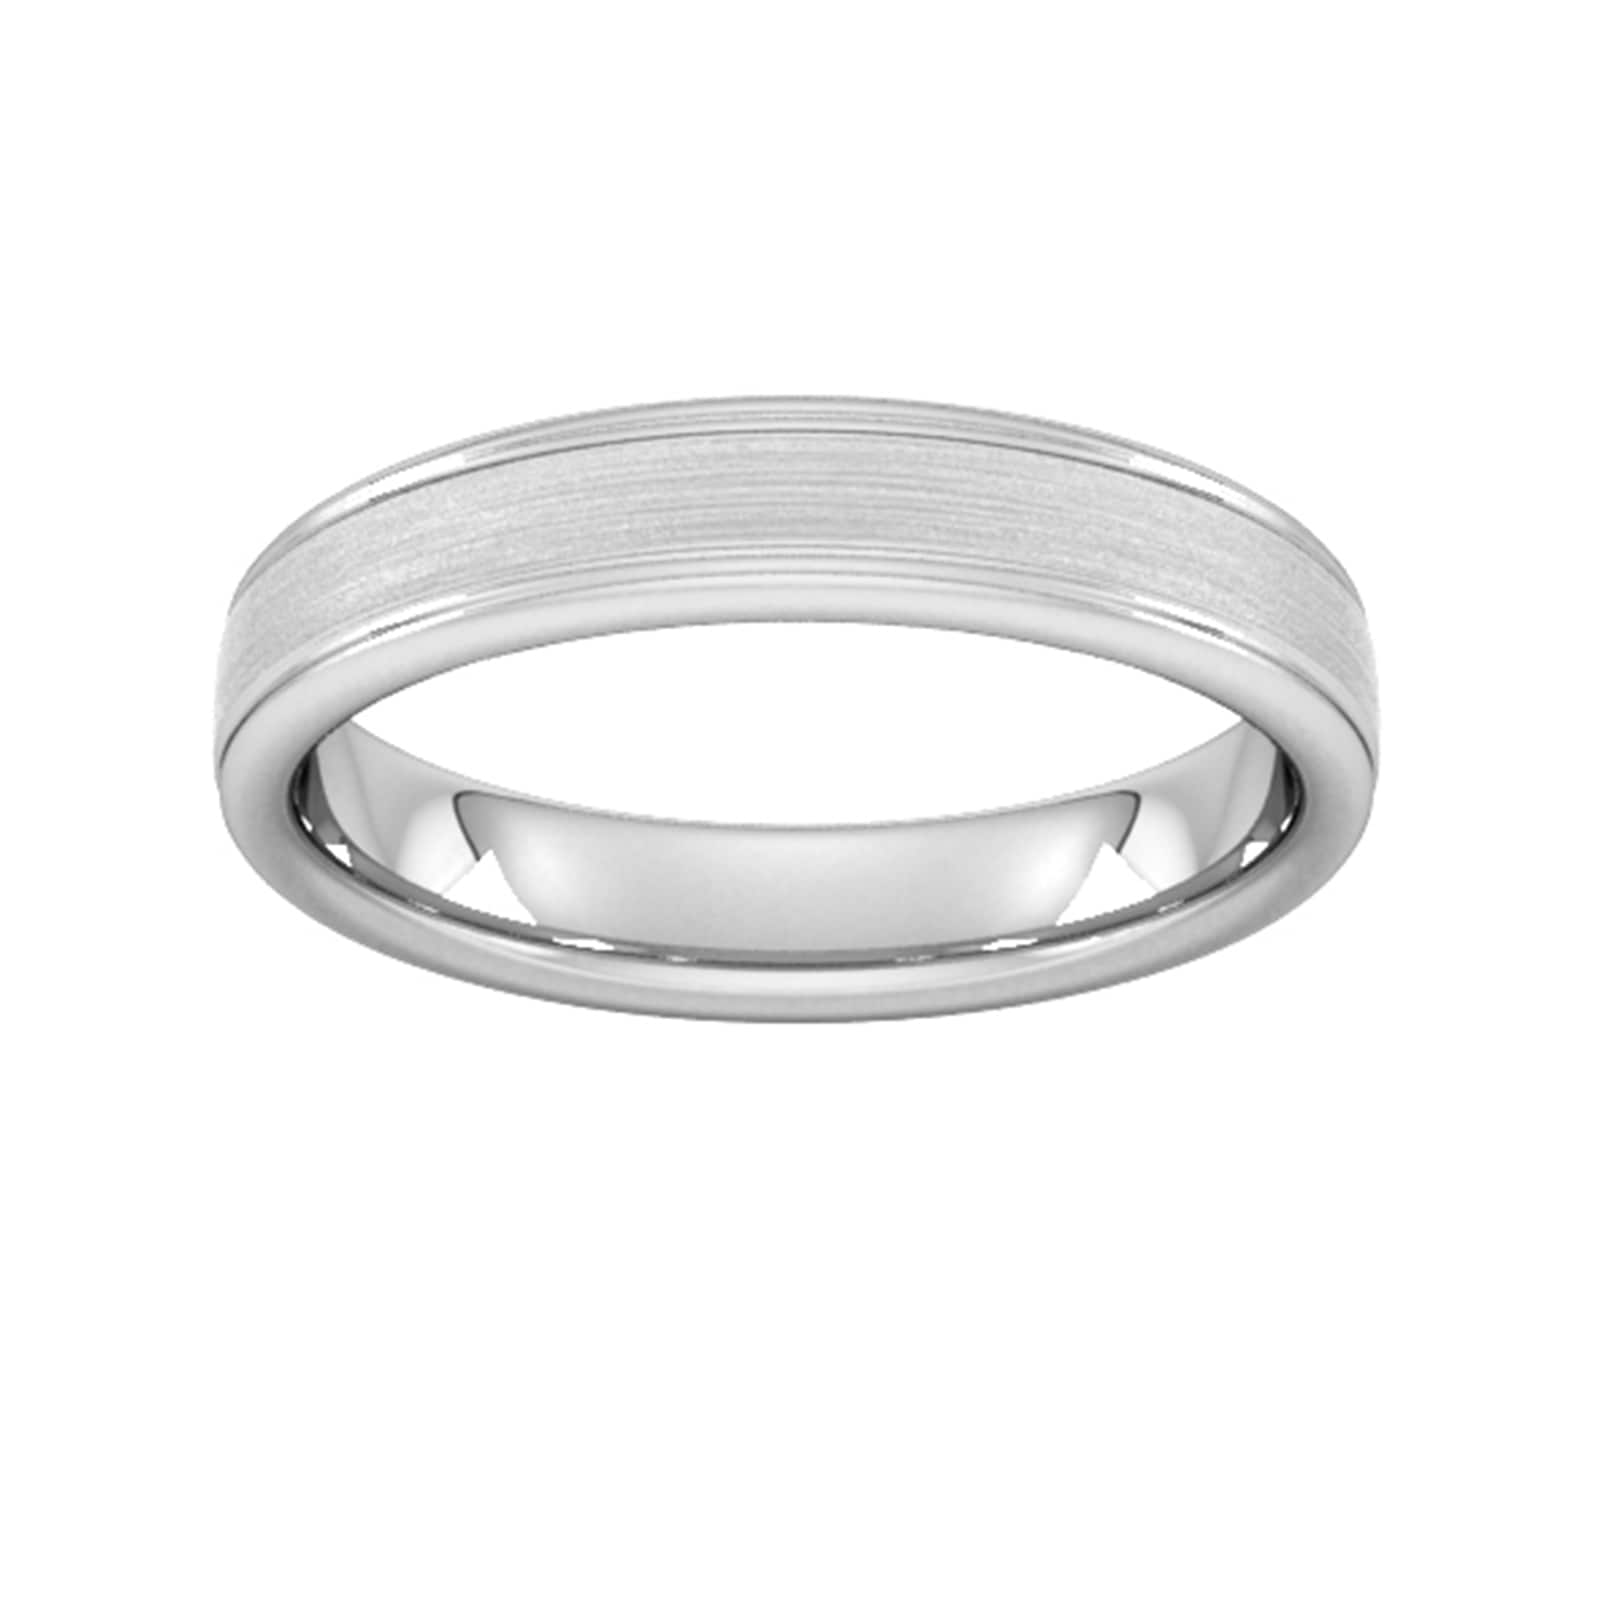 4mm Slight Court Heavy Matt Centre With Grooves Wedding Ring In 9 Carat White Gold - Ring Size O